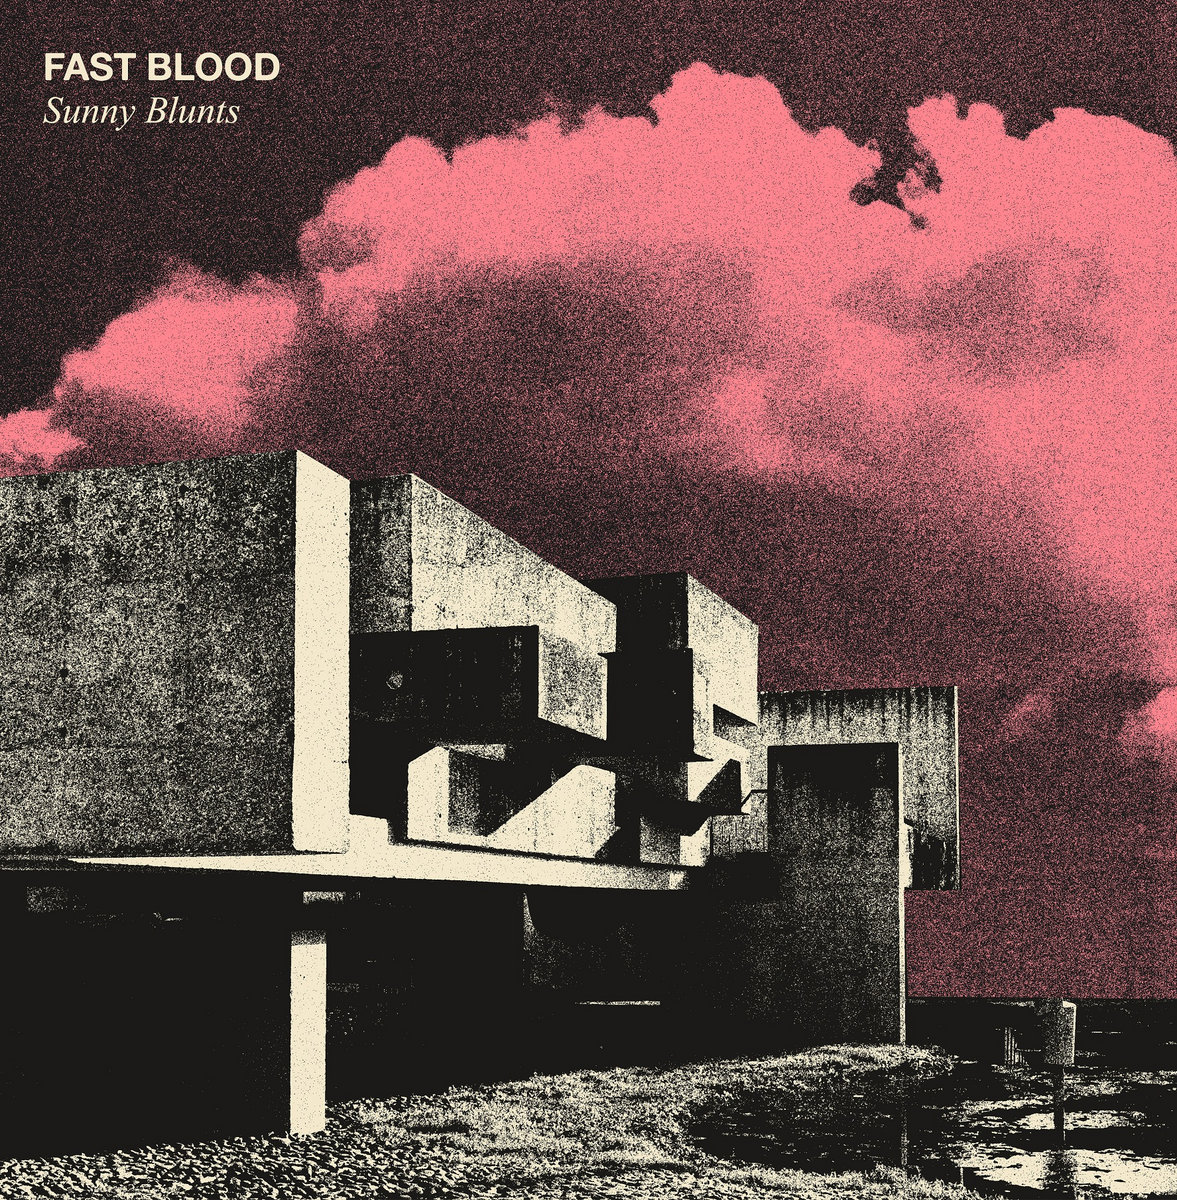 DEBUT ALBUM REVIEW: Sunny Blunts by Fast Blood